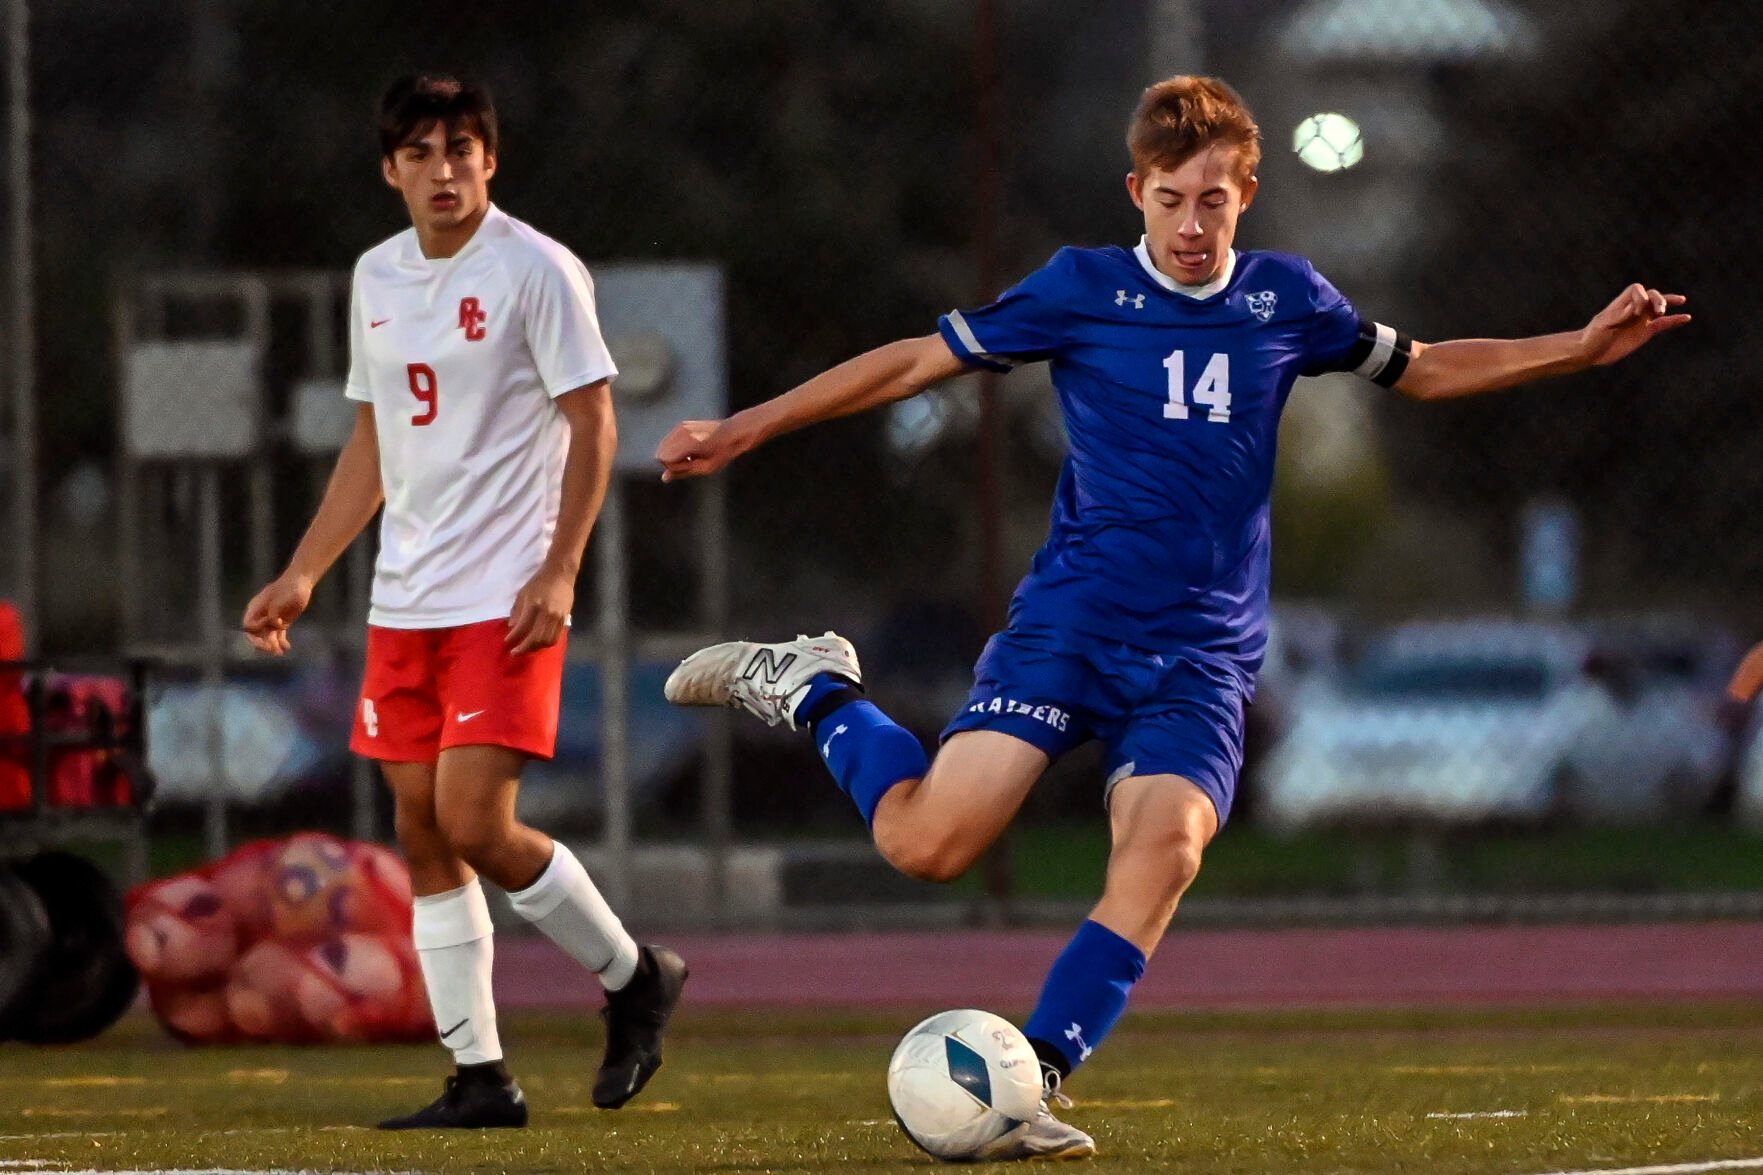 Stevens boys, girls shut out Patriots and more from Thursday’s high school soccer action